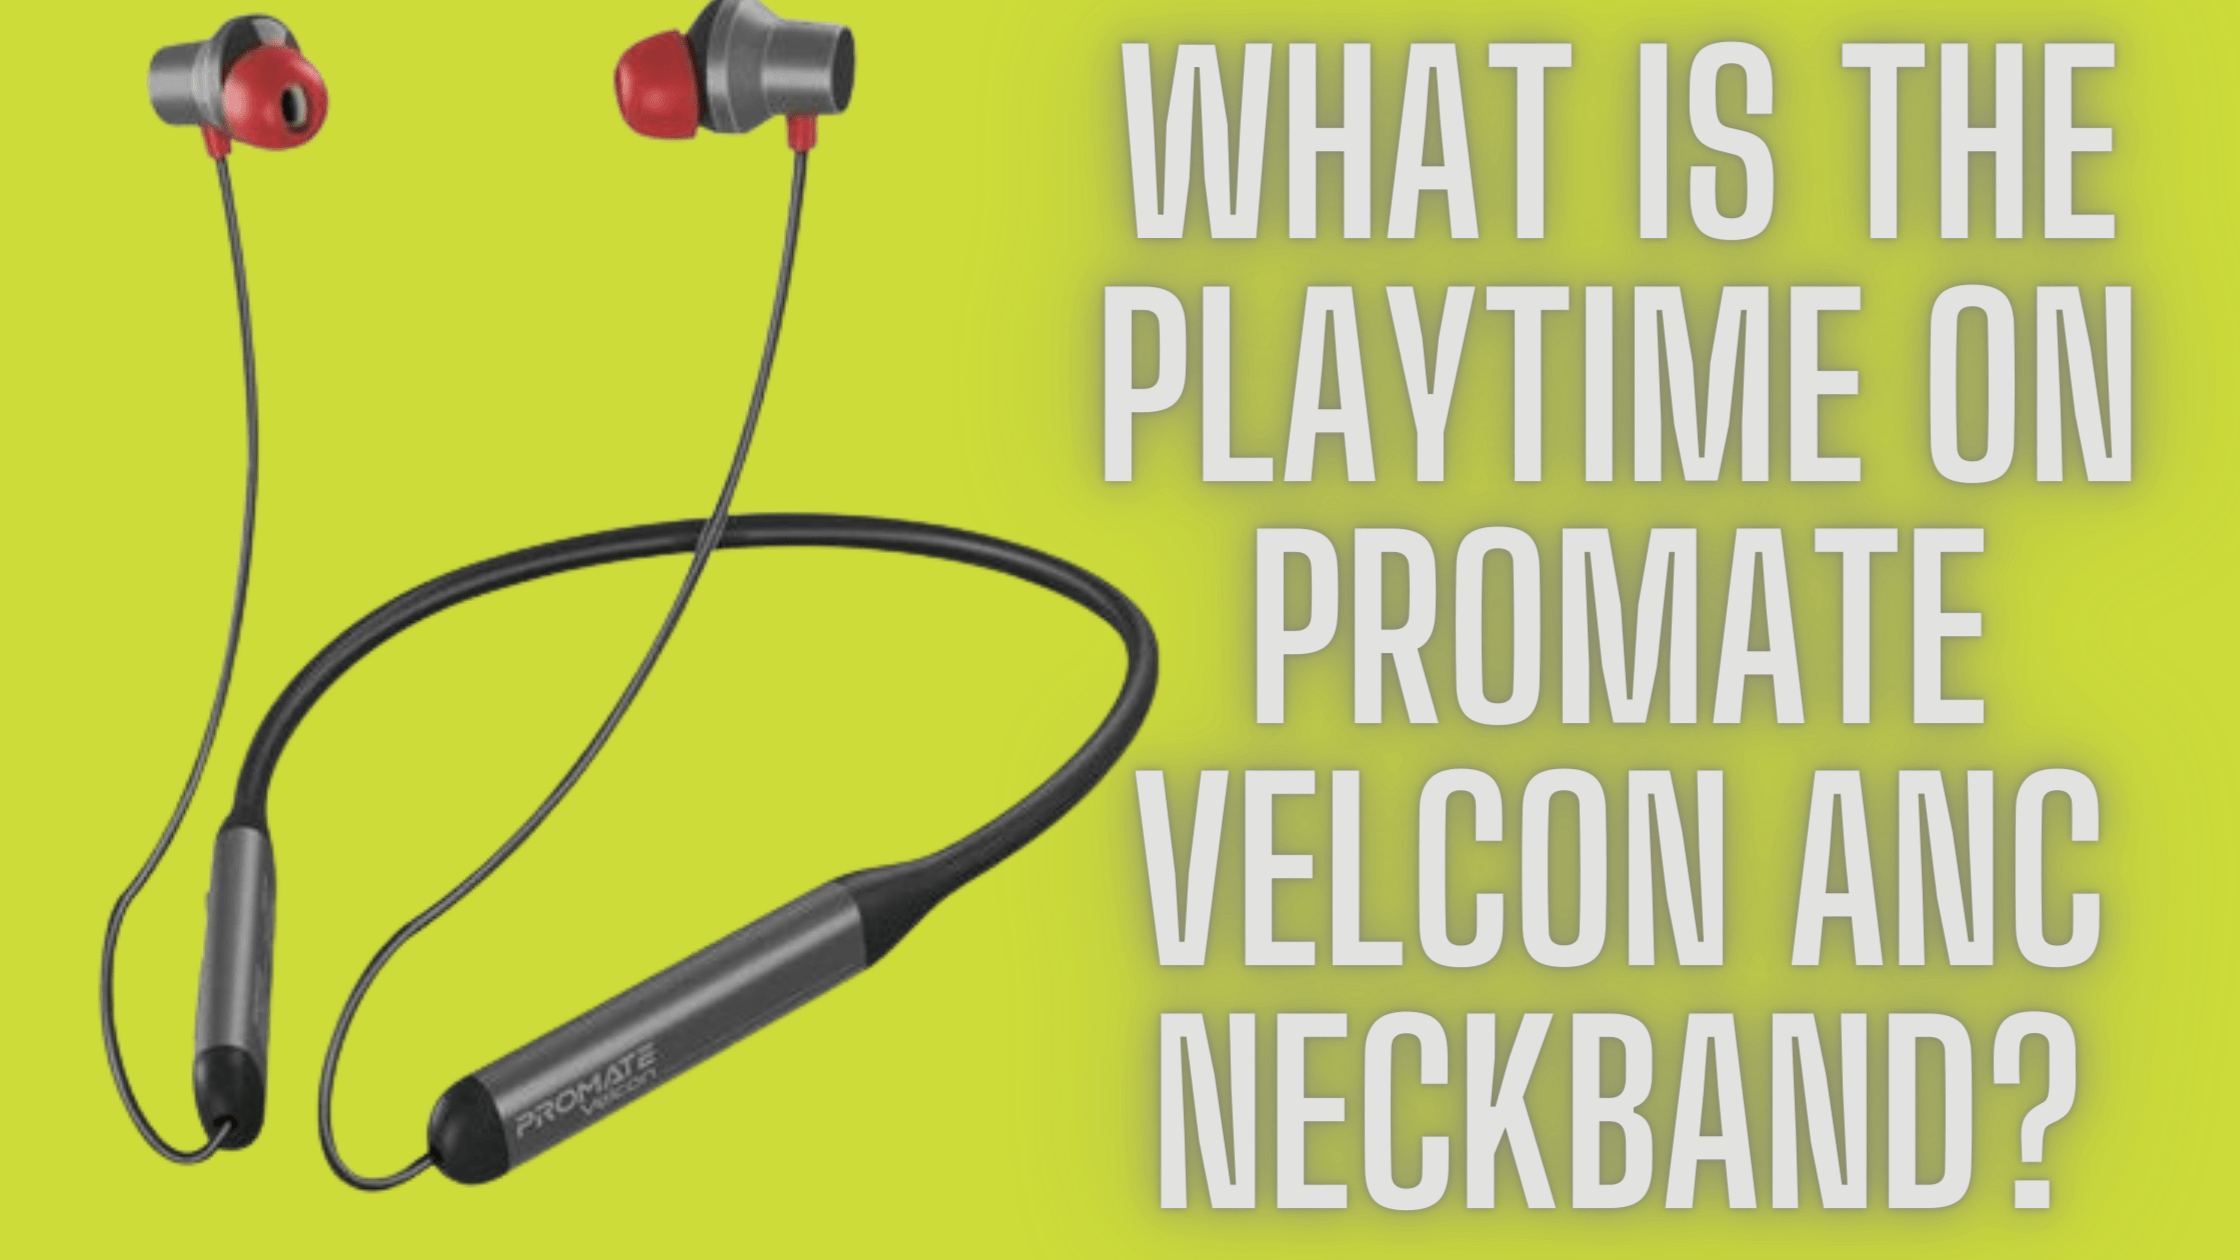 What is the playtime on promate velcon anc neckband?